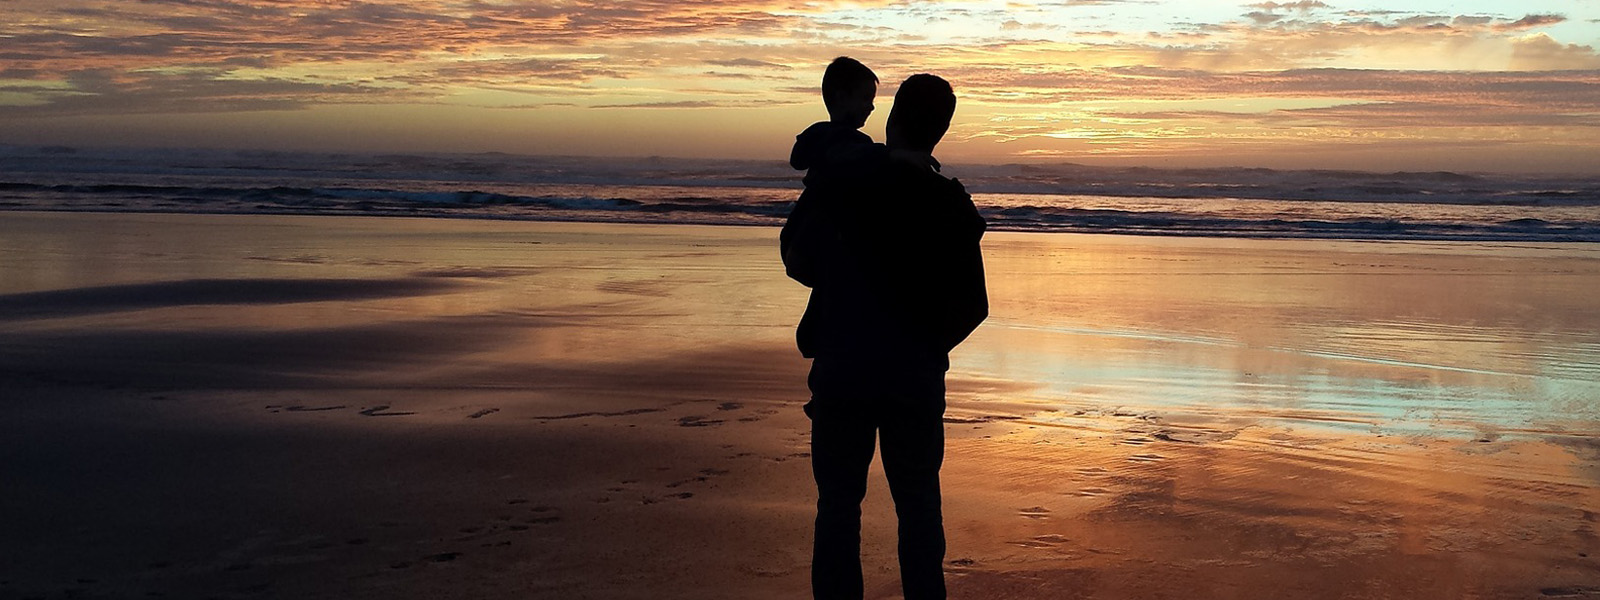 A father and child on a beach at sunset